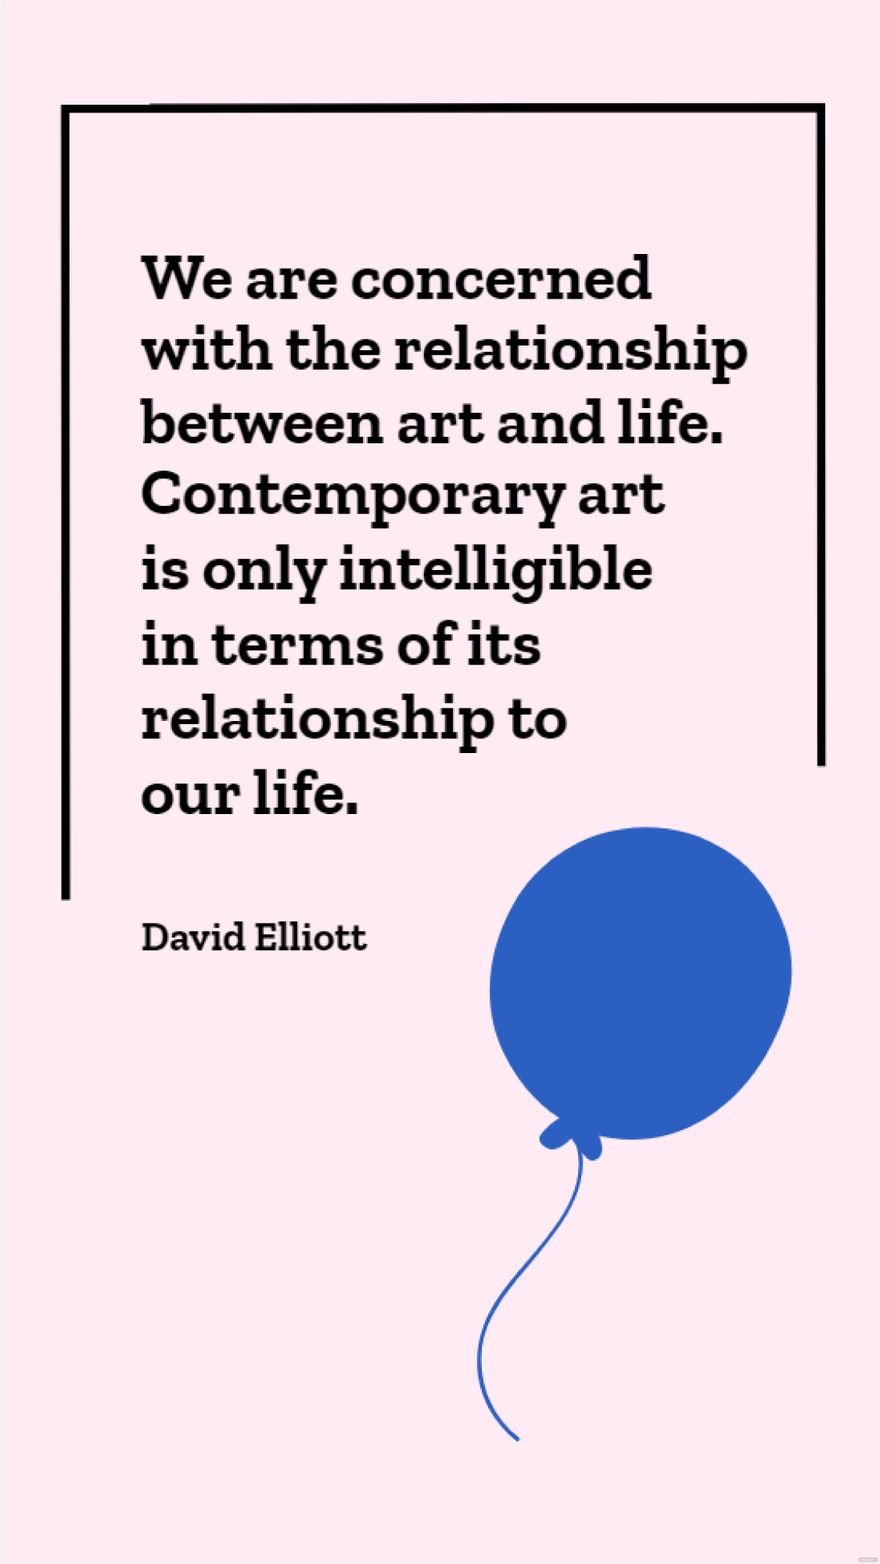 David Elliott - We are concerned with the relationship between art and life. Contemporary art is only intelligible in terms of its relationship to our life.